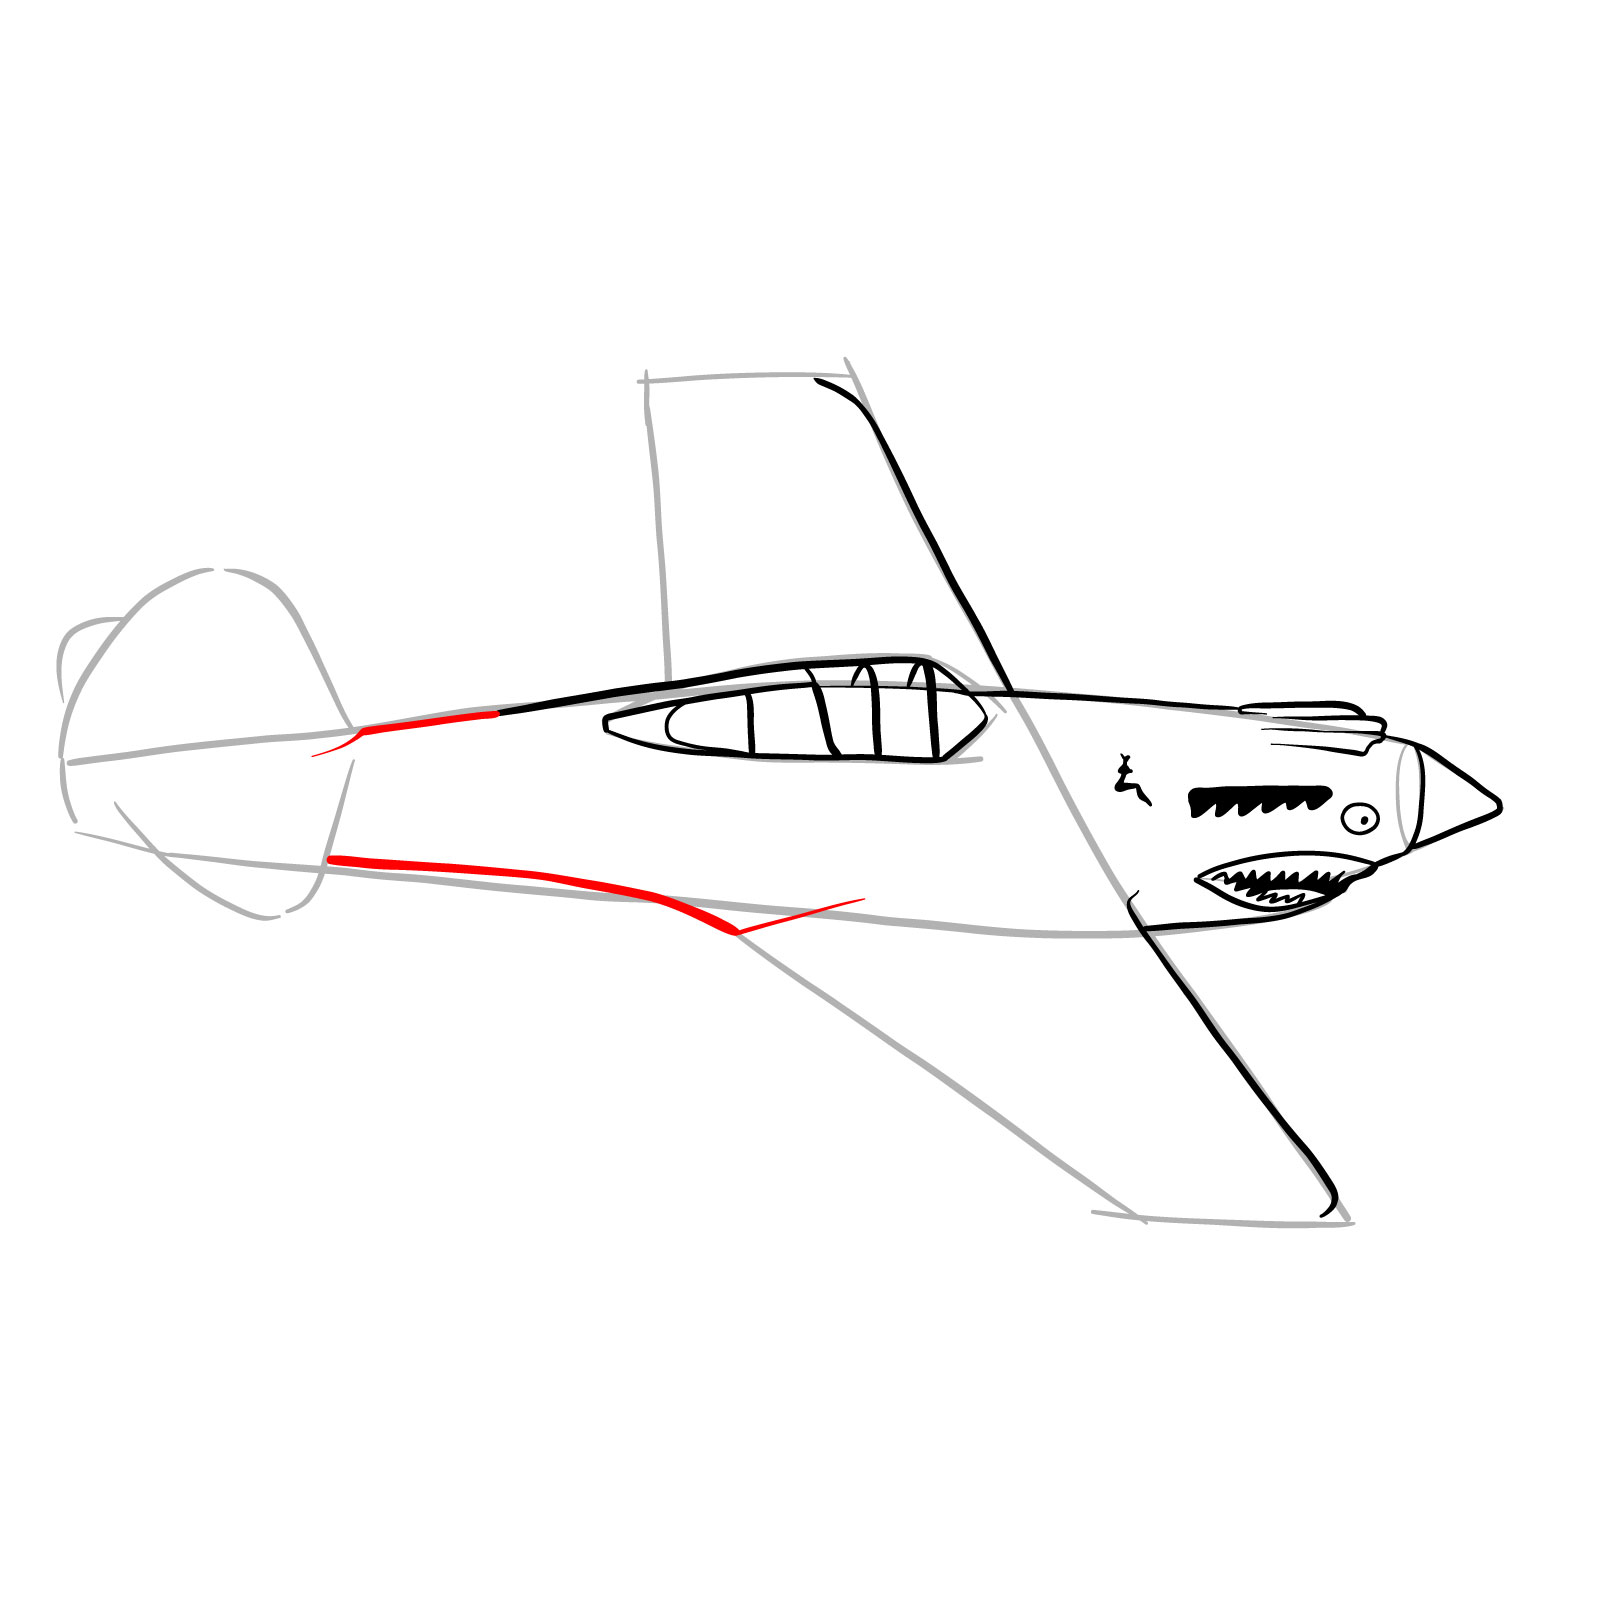 How to draw a P-40 Flying Tiger - step 16